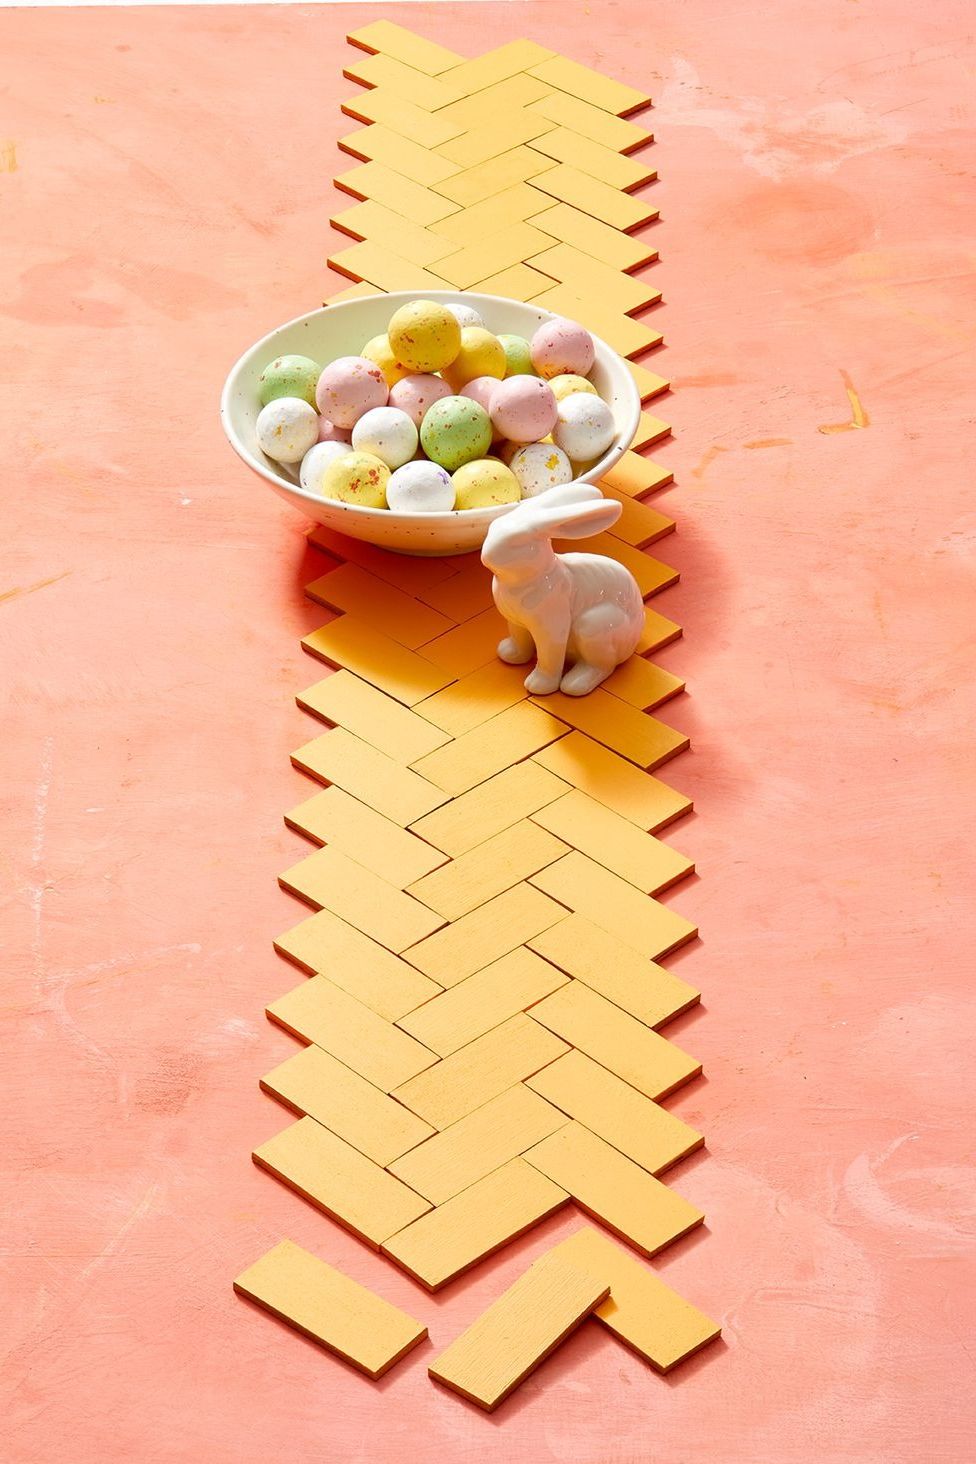 https://hips.hearstapps.com/hmg-prod/images/adult-craft-ideas-wood-table-runner-64169557a5338.jpeg?crop=0.996xw:0.996xh;0.00411xw,0.00411xh&resize=980:*